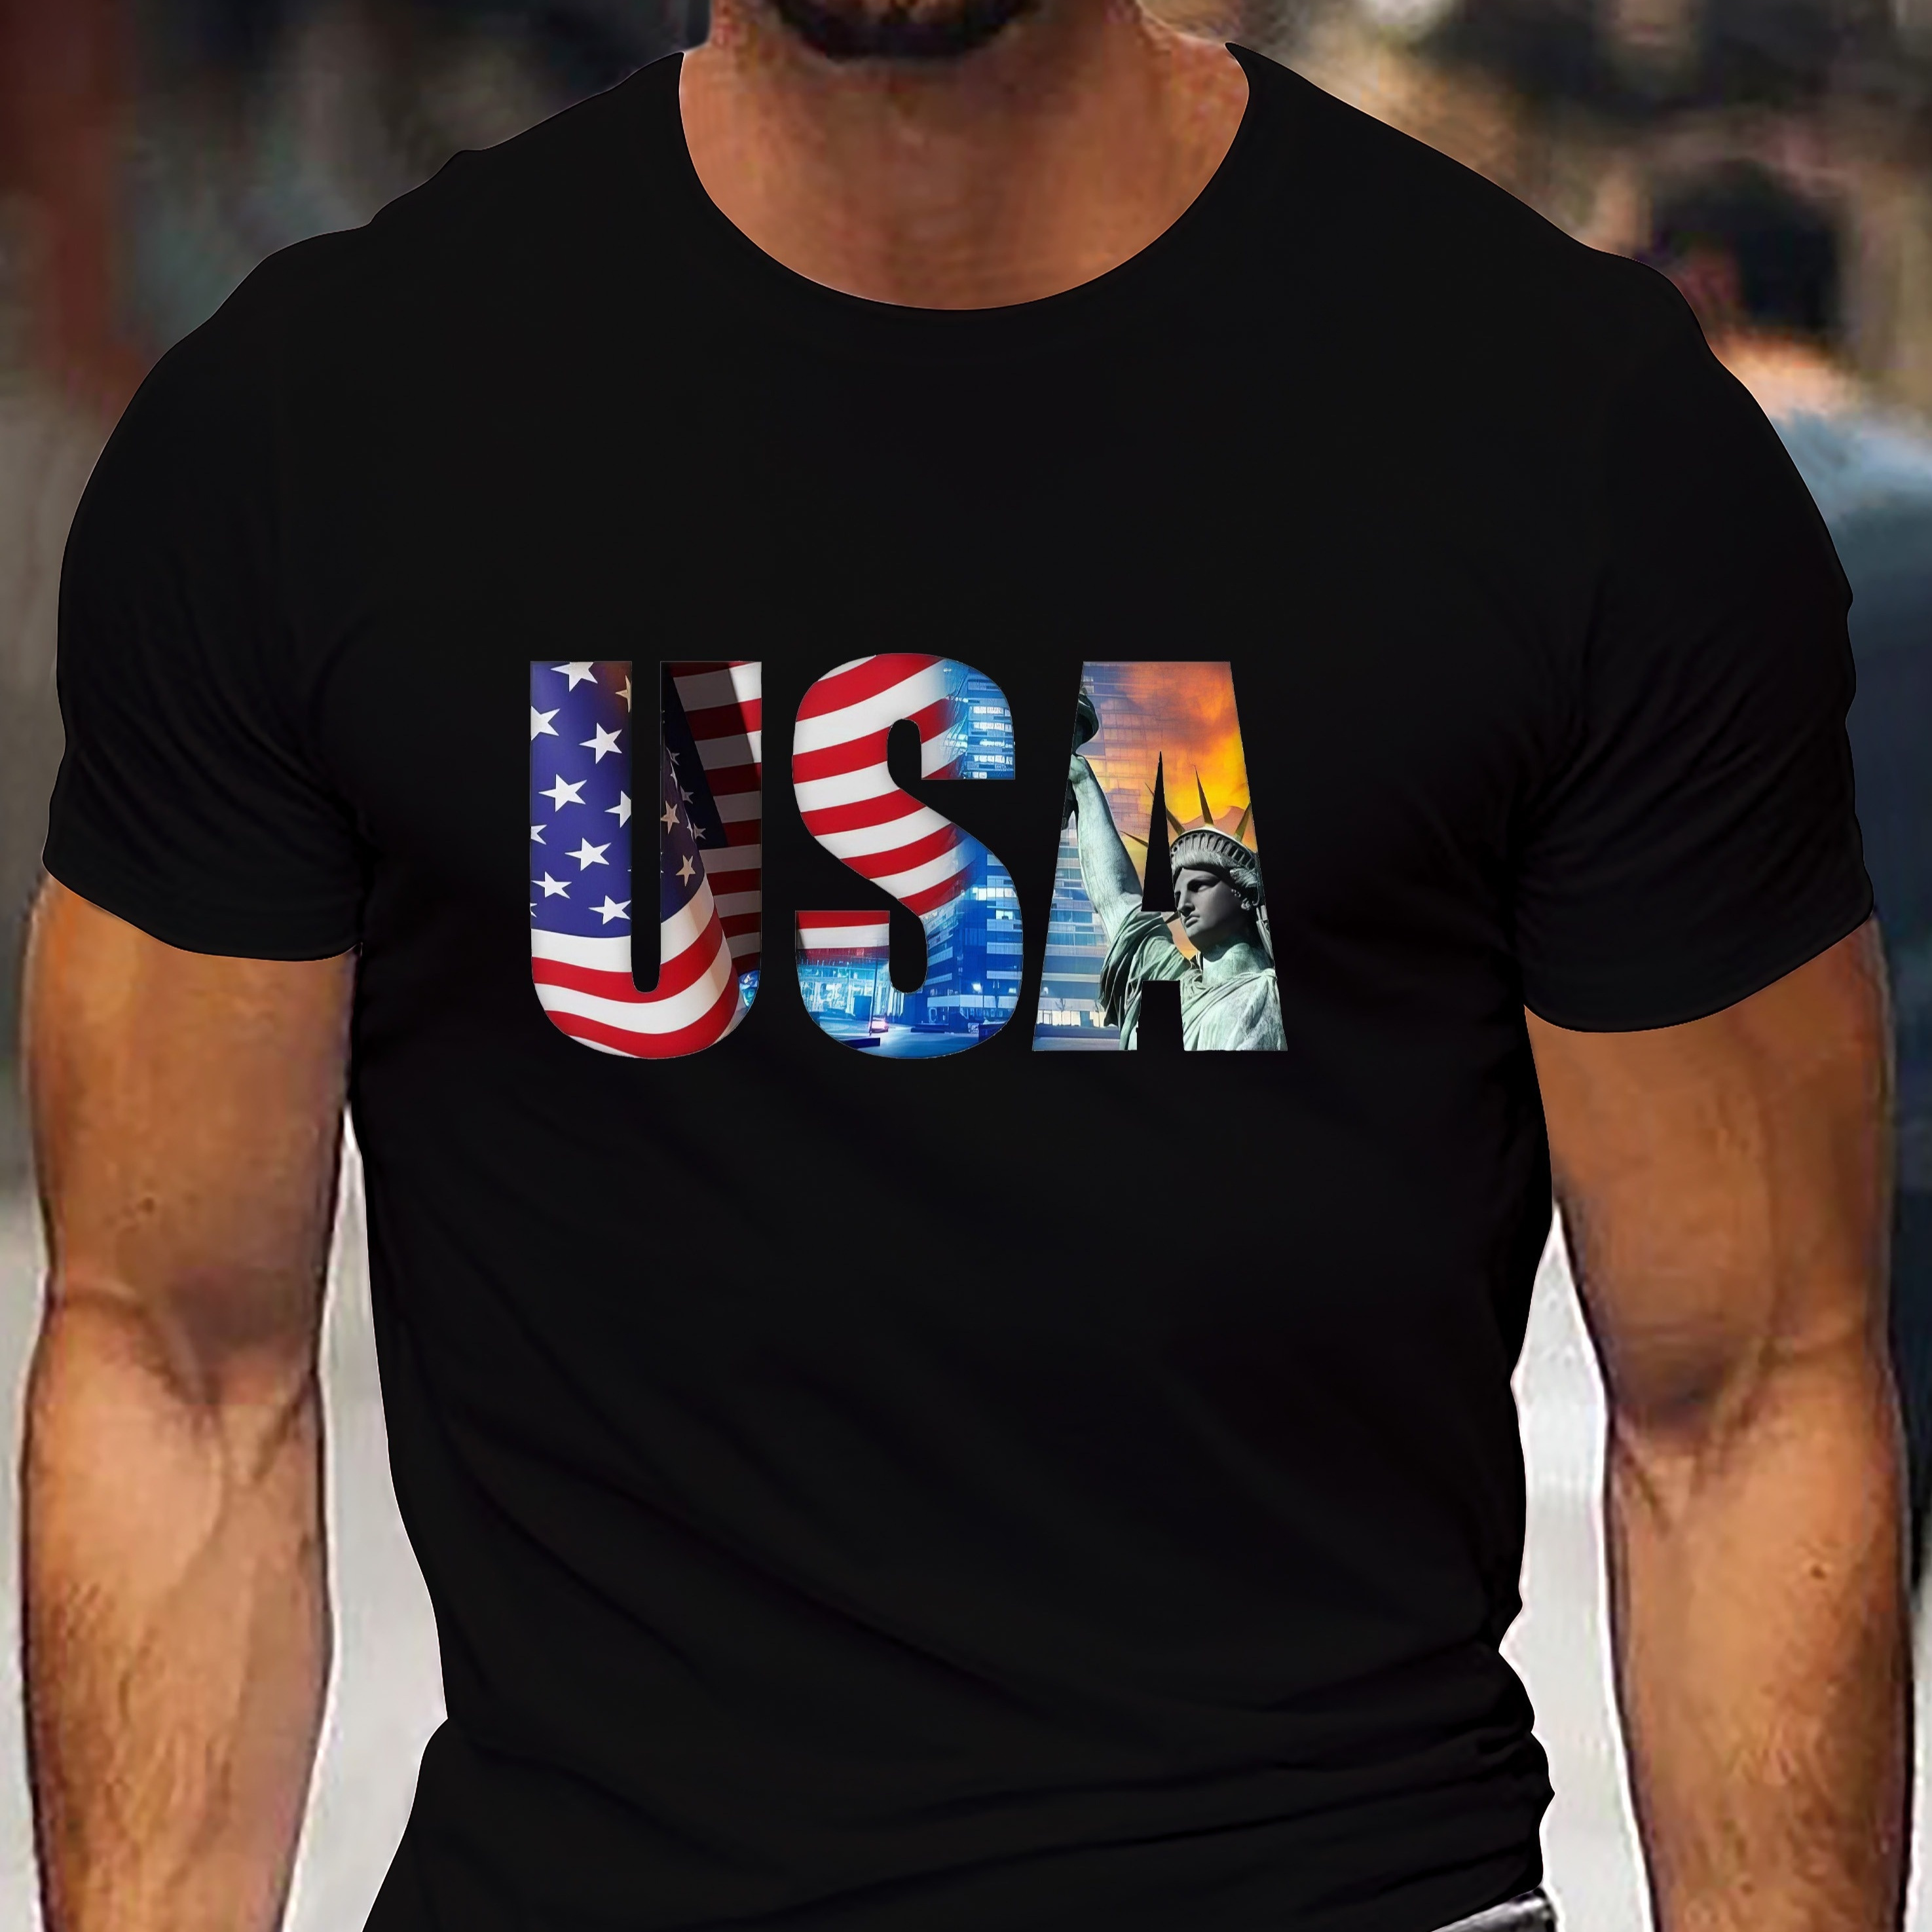 

usa" American Flag Stylish Print Summer & Spring Tee For Men, Casual Short Sleeve Fashion Style T-shirt, Sporty New Arrival Novelty Top For Leisure